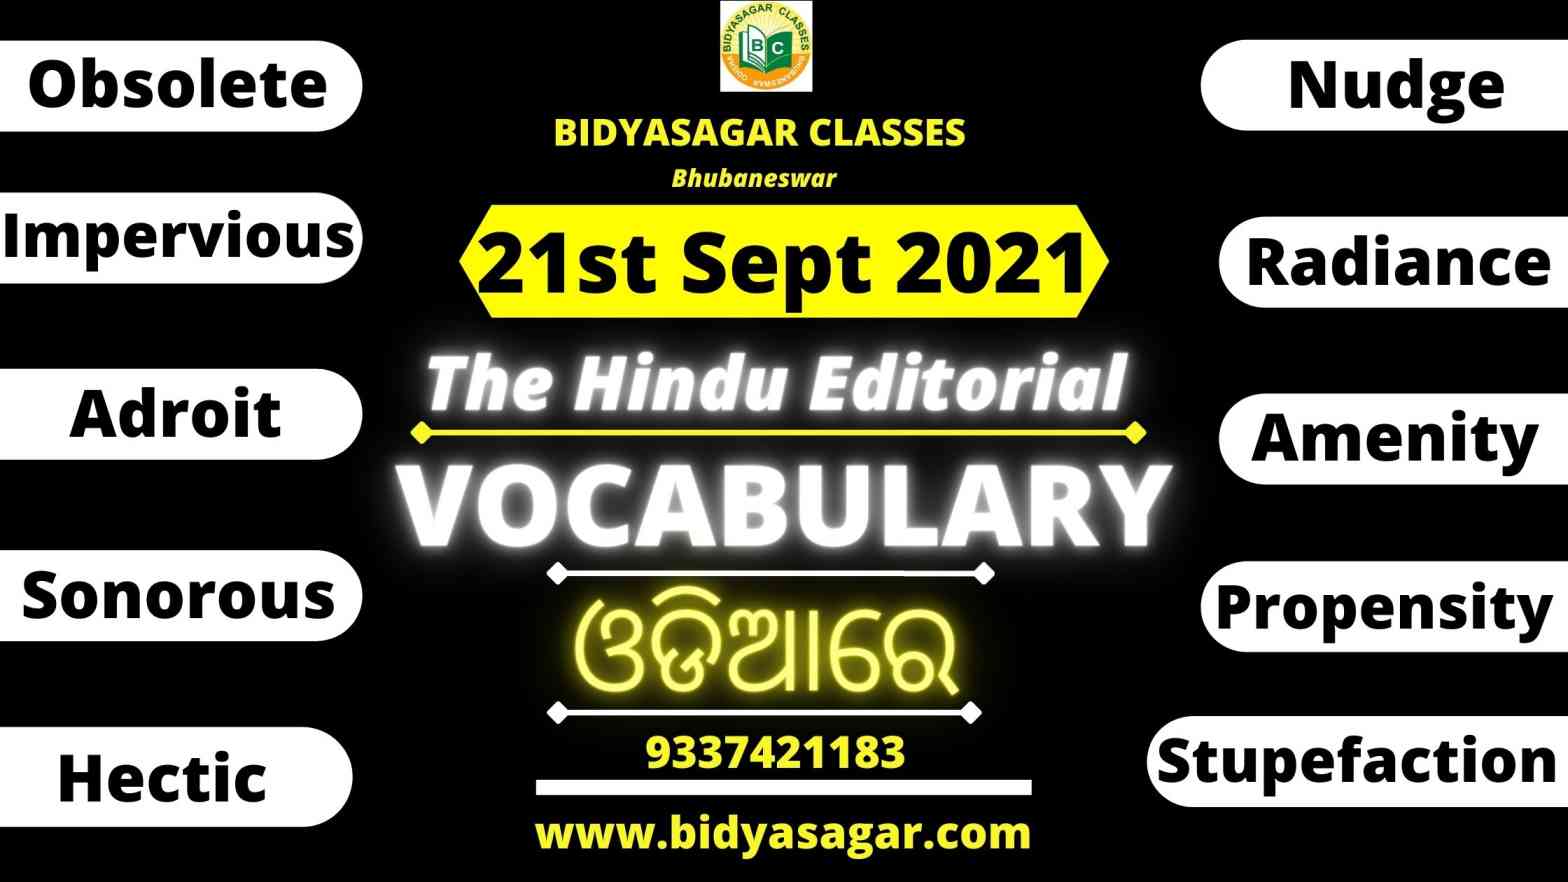 The Hindu Editorial Vocabulary of 21st September 2021